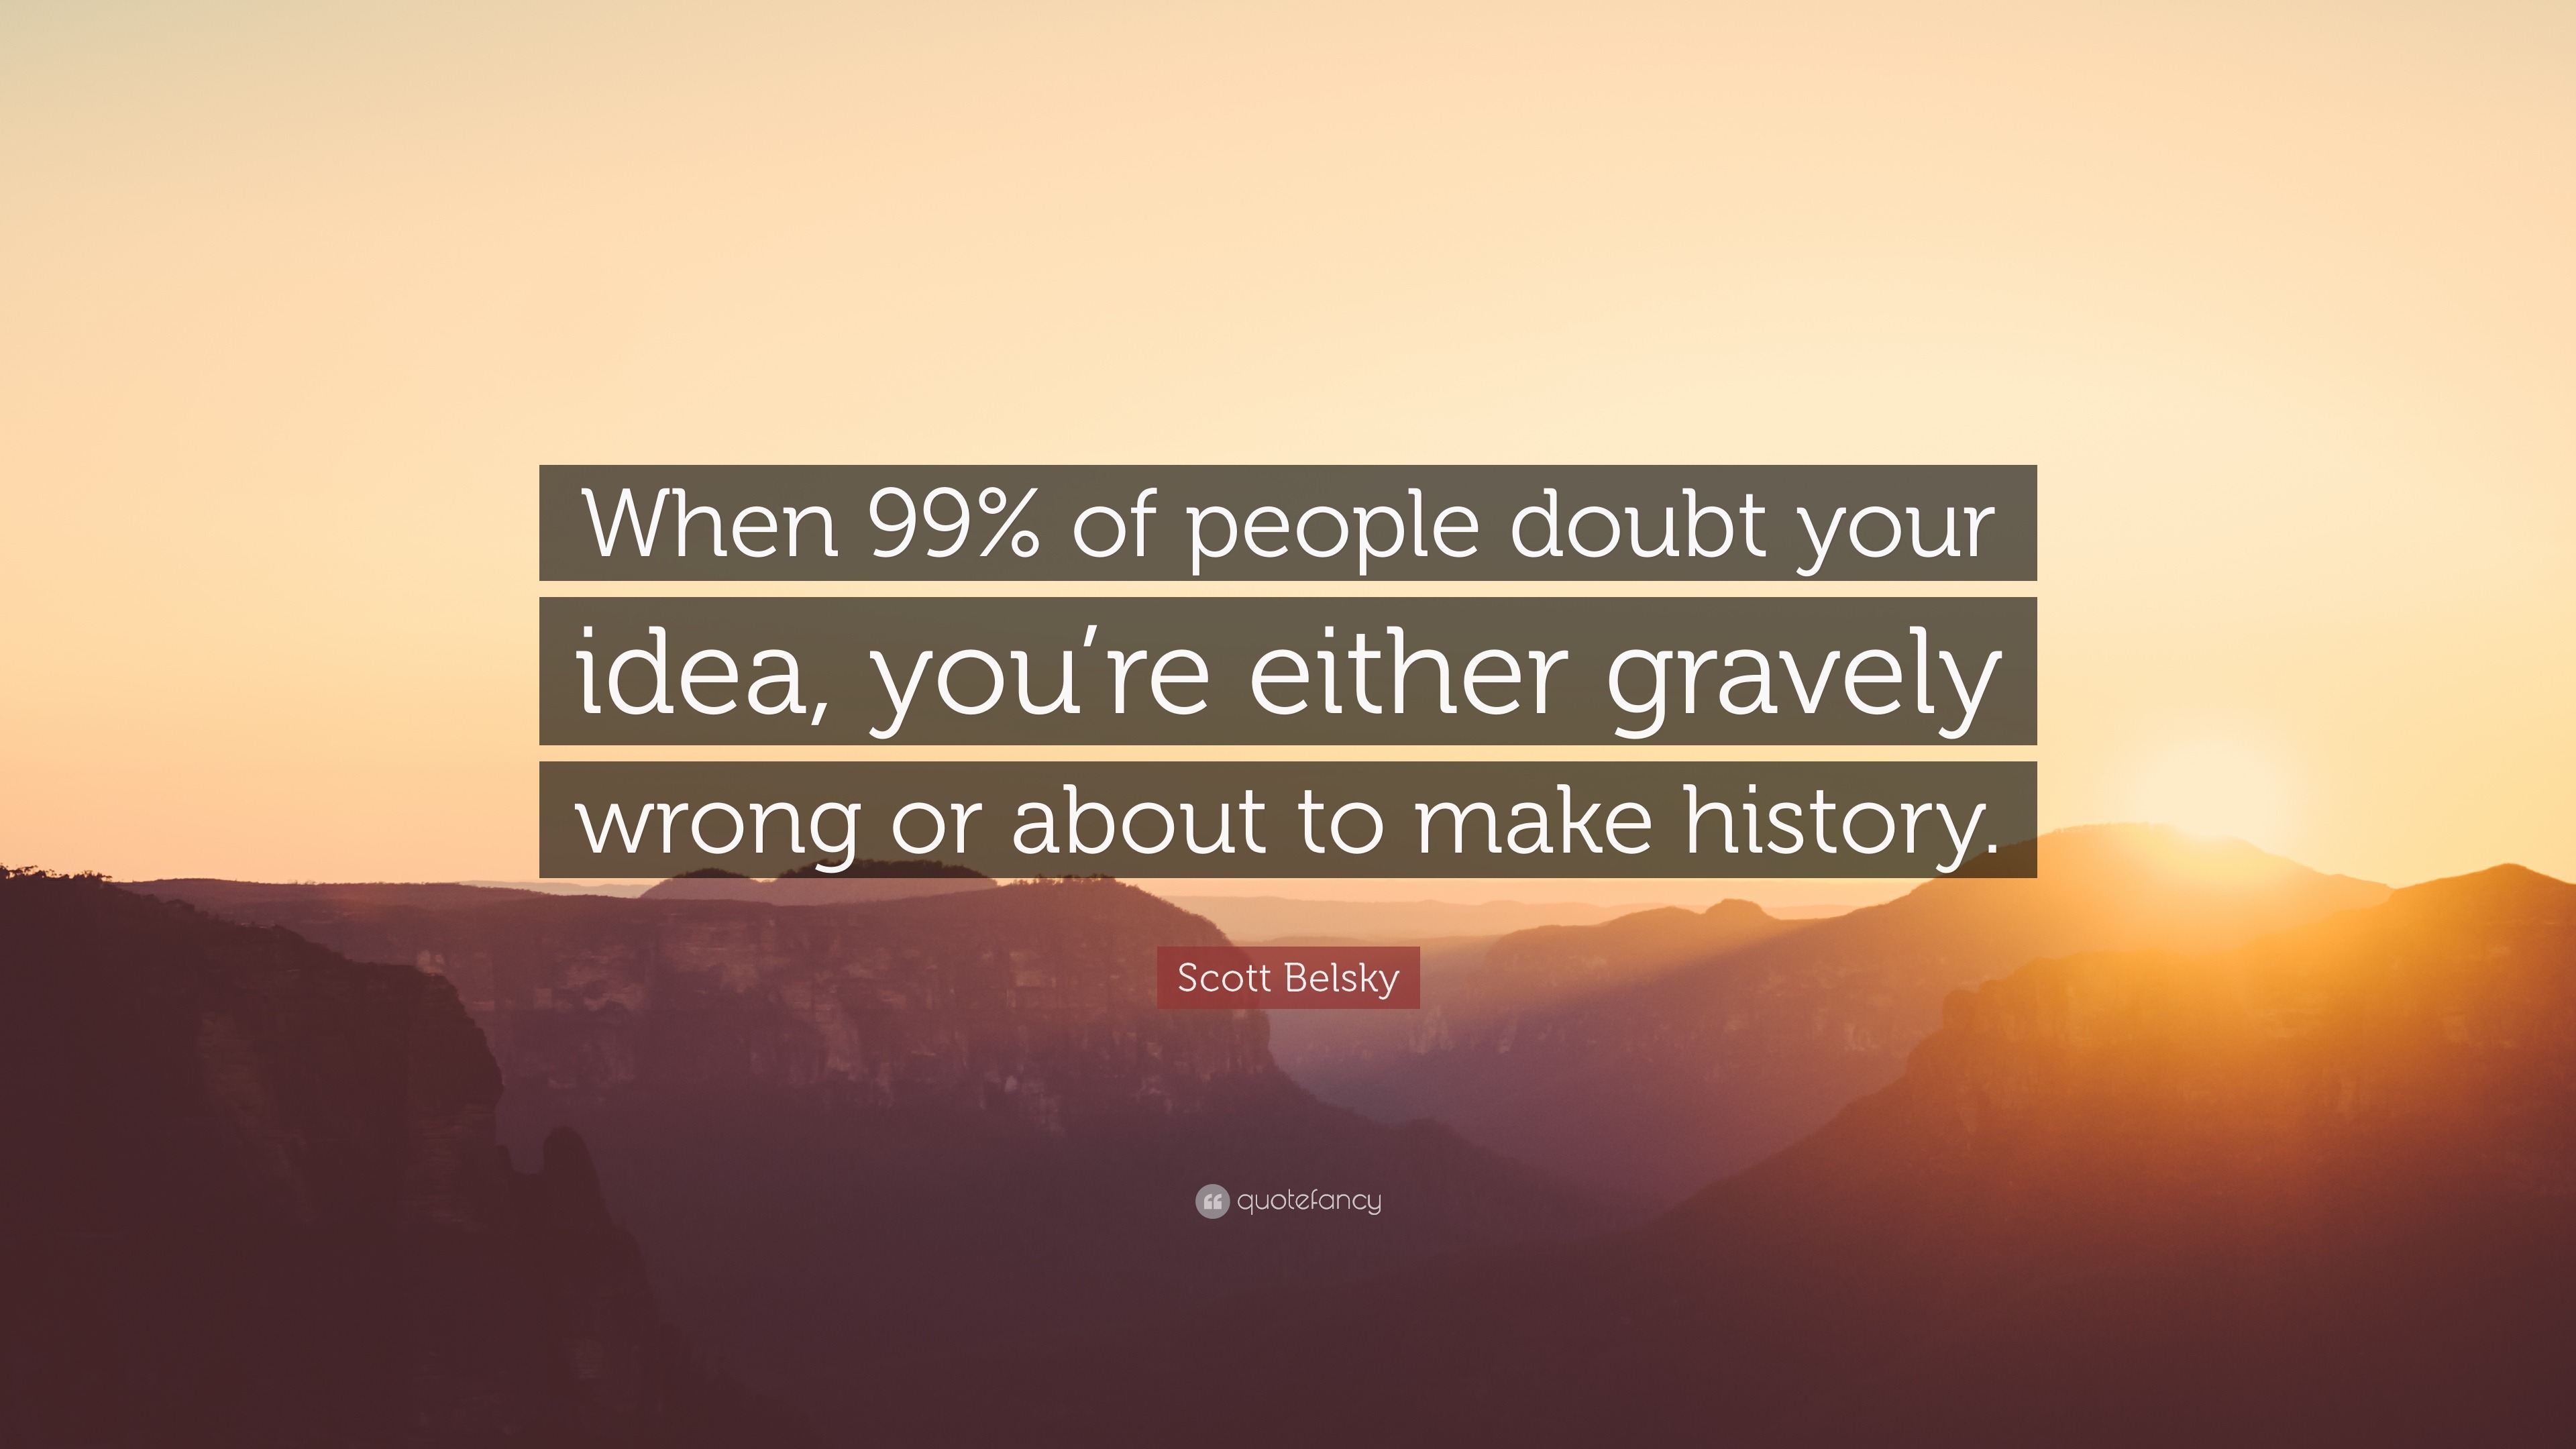 19086-Scott-Belsky-Quote-When-99-of-people-doubt-your-idea-you-re-either.jpg